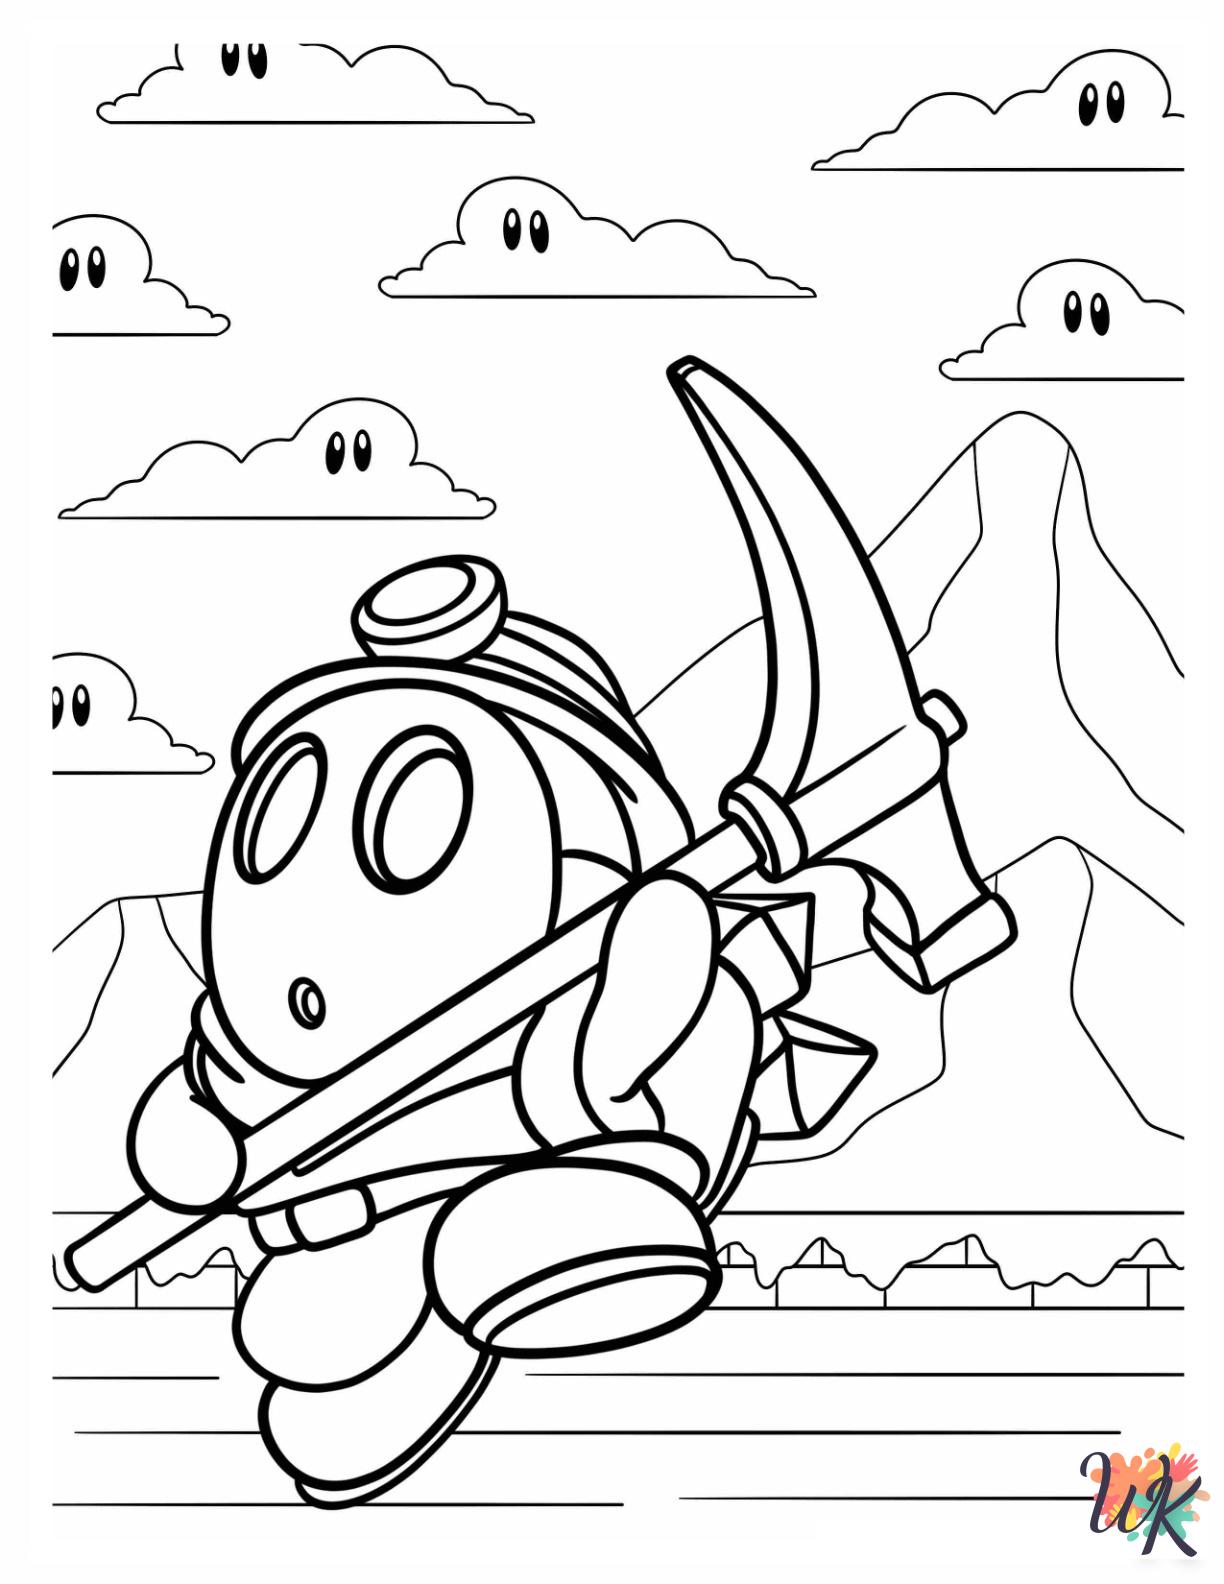 Shy Guy coloring pages free printable